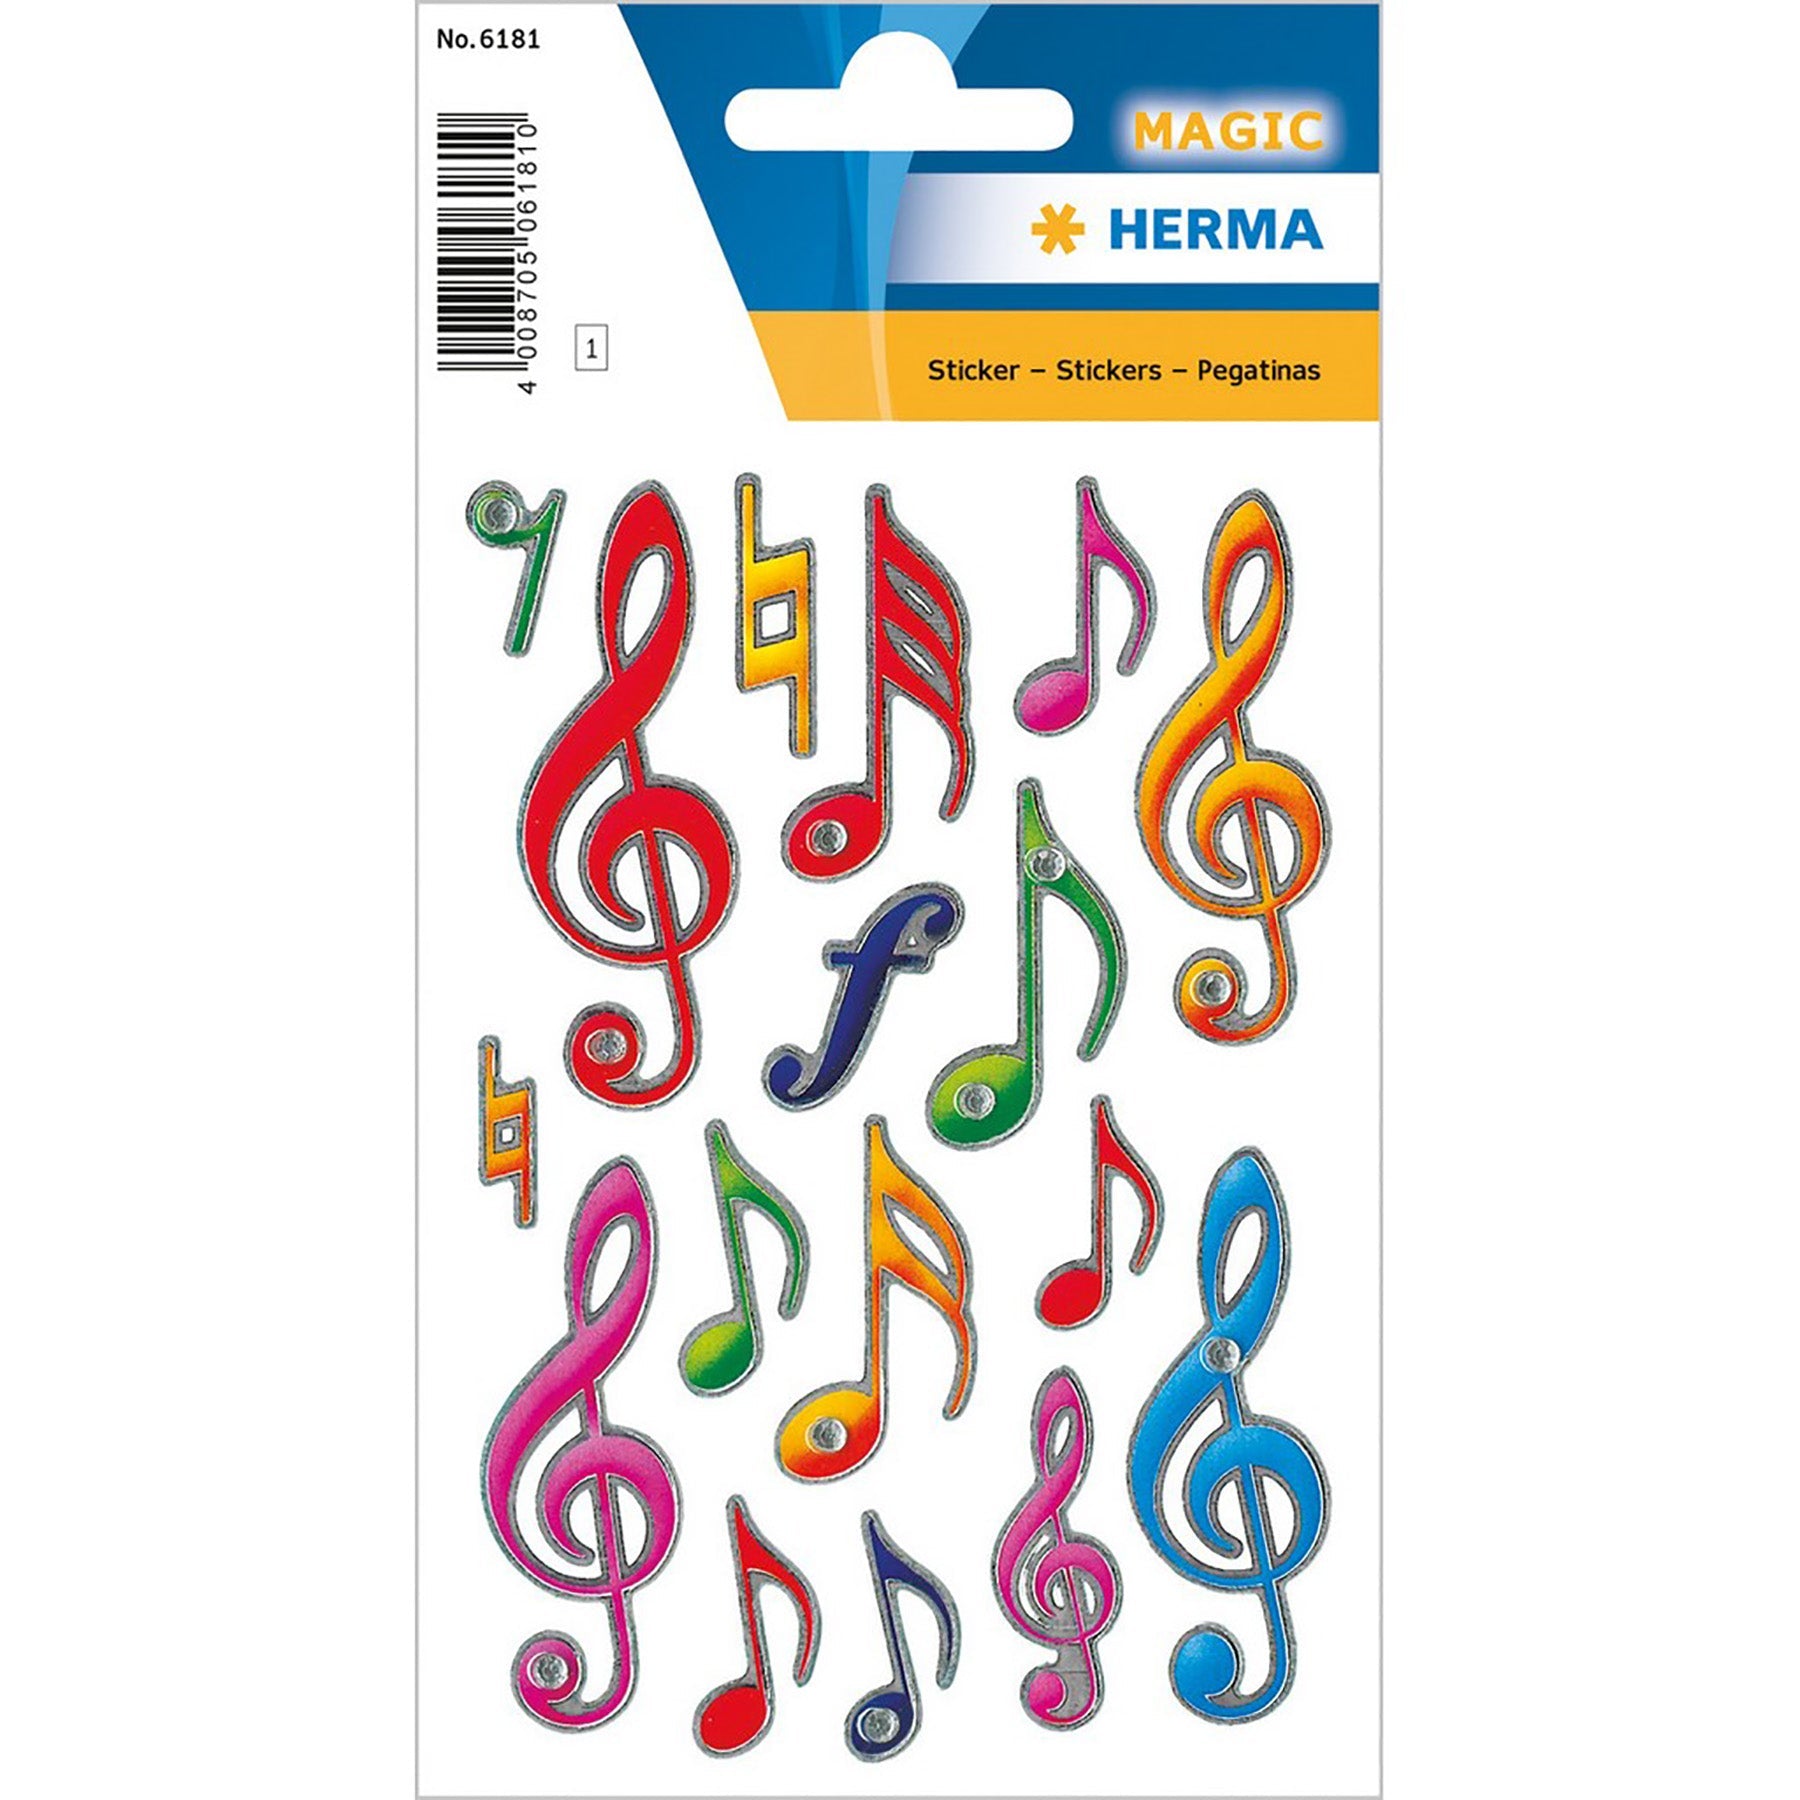 Herma Magic Stickers Musical Clefs with Jewel 4.75x3.1in Sheet